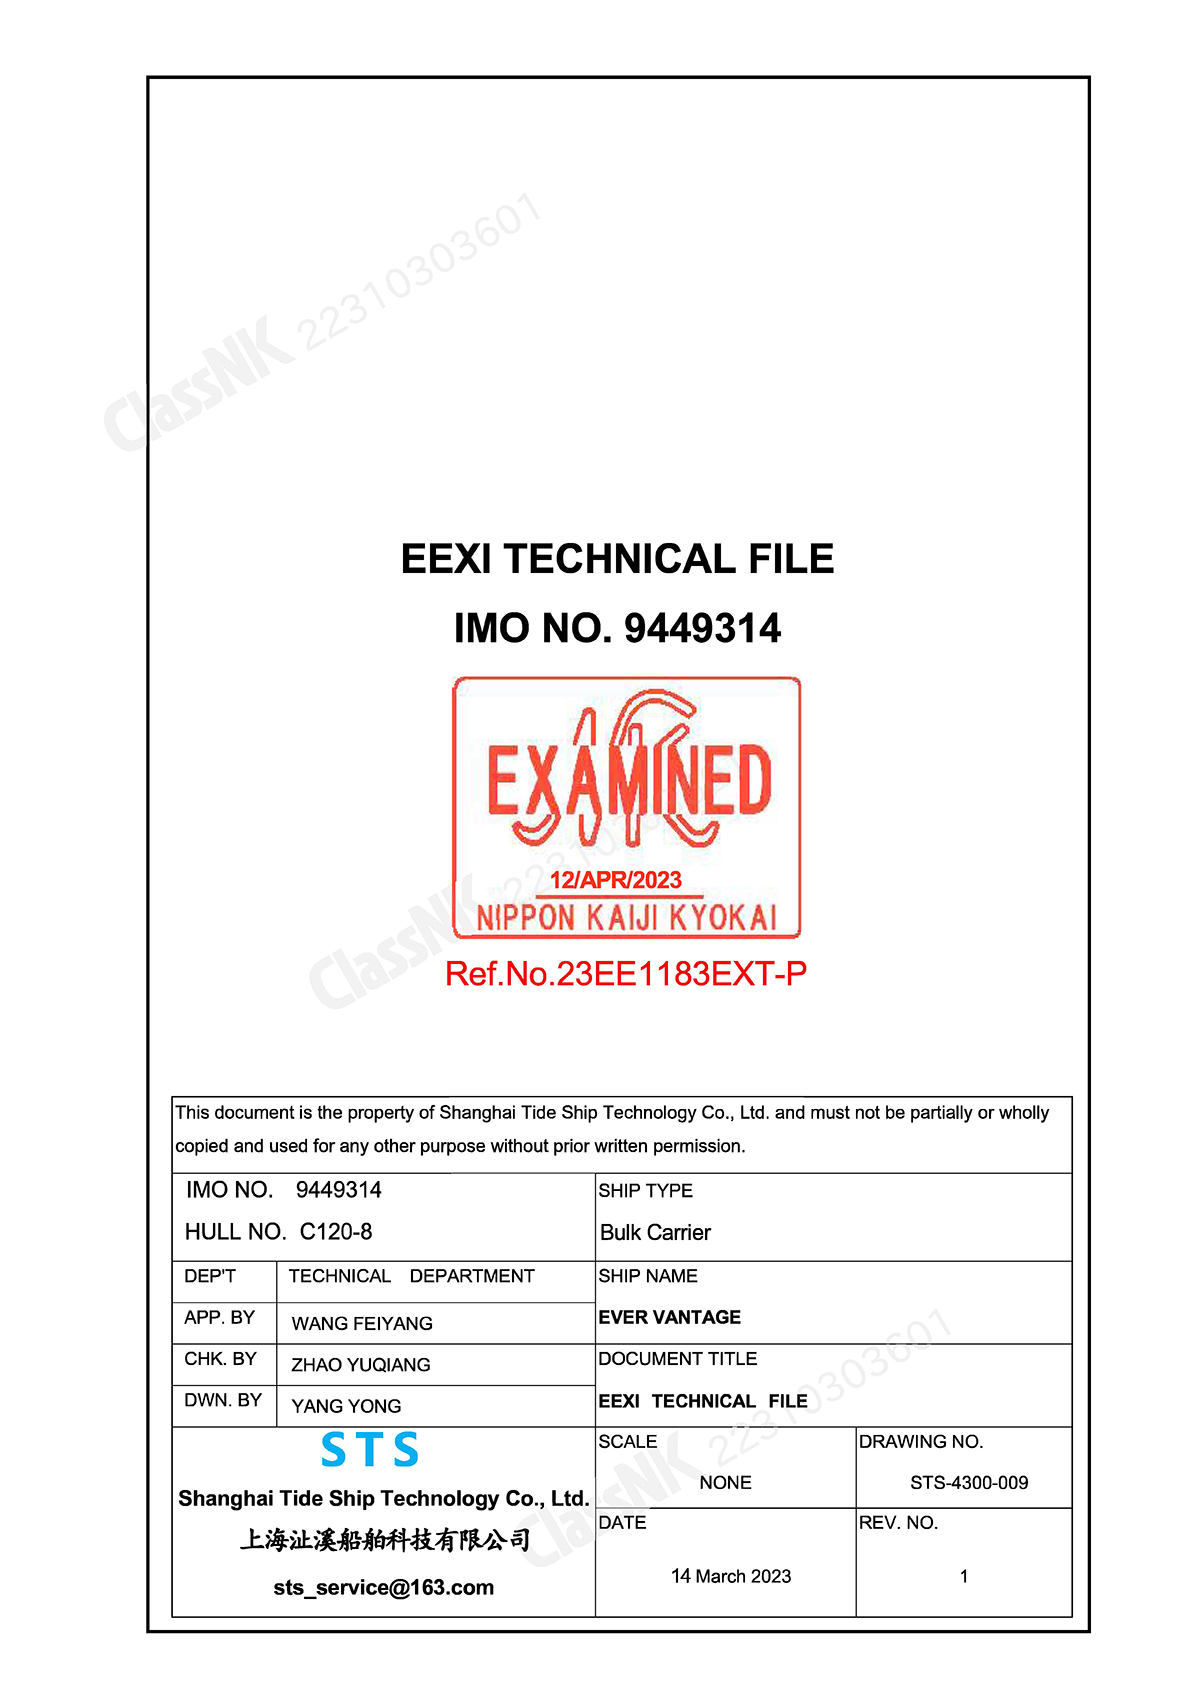 2 NK CLASS APPROVED EEXI TECHNICAL FILE.jpg